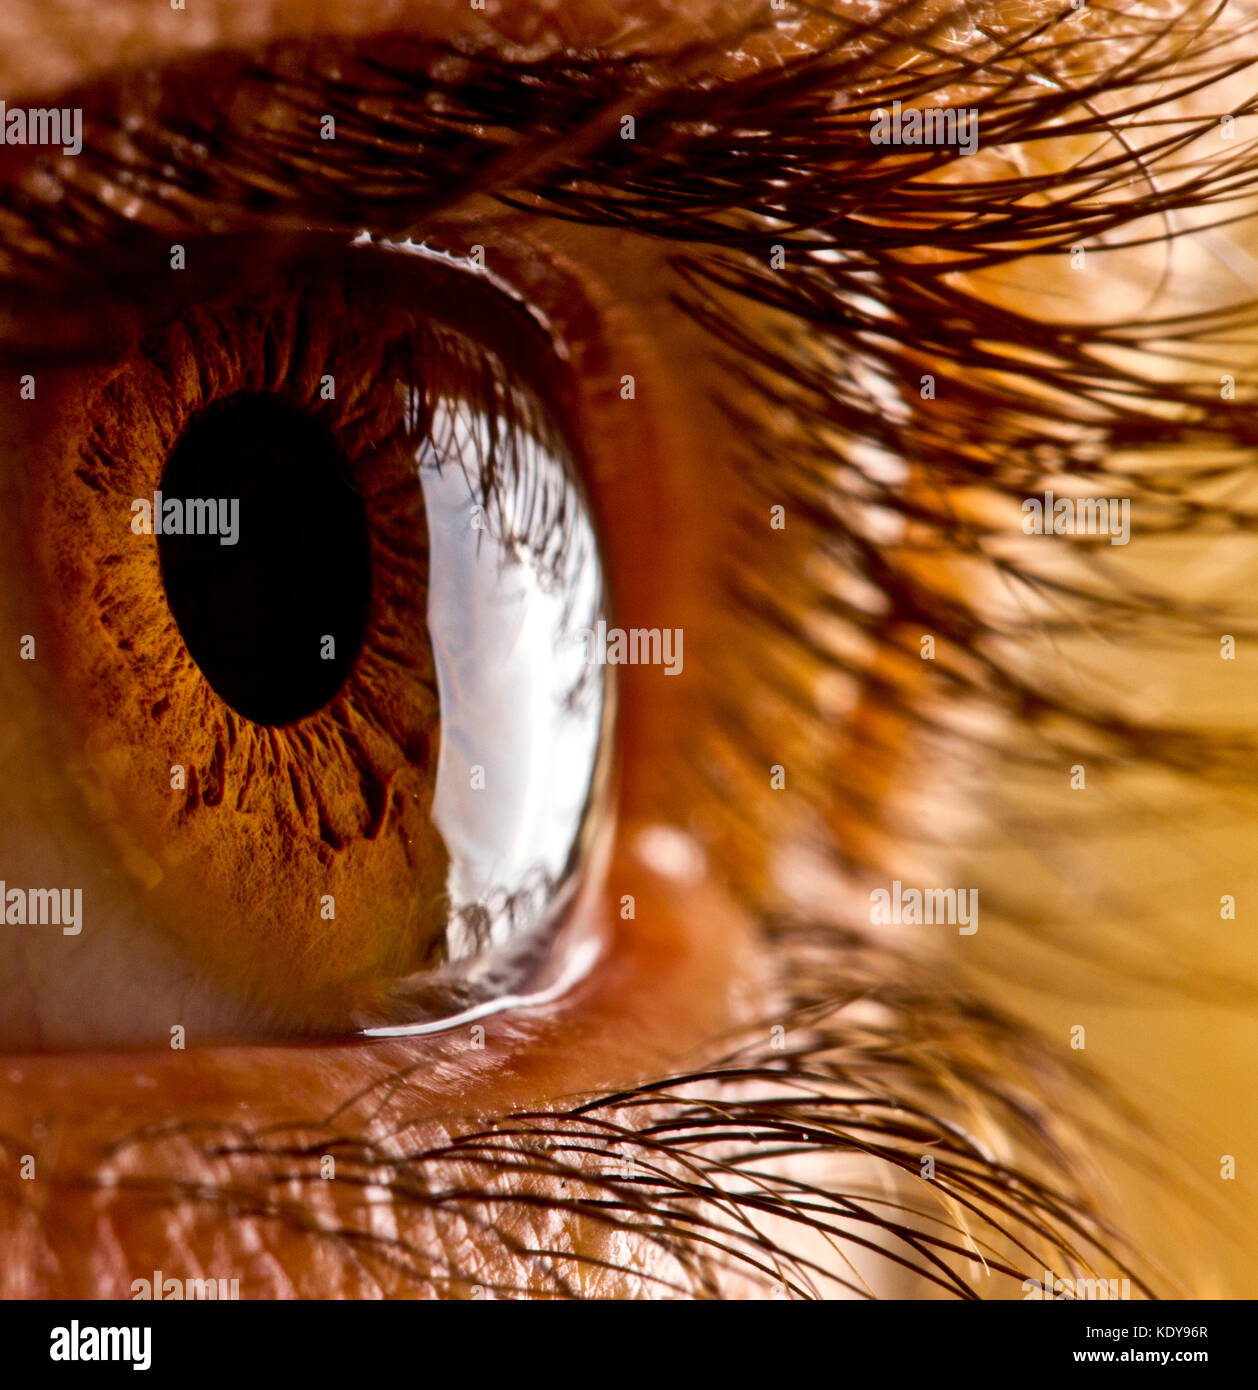 Macro photography of an eye. Close-up of the pupil with long eyelashes. Stock Photo